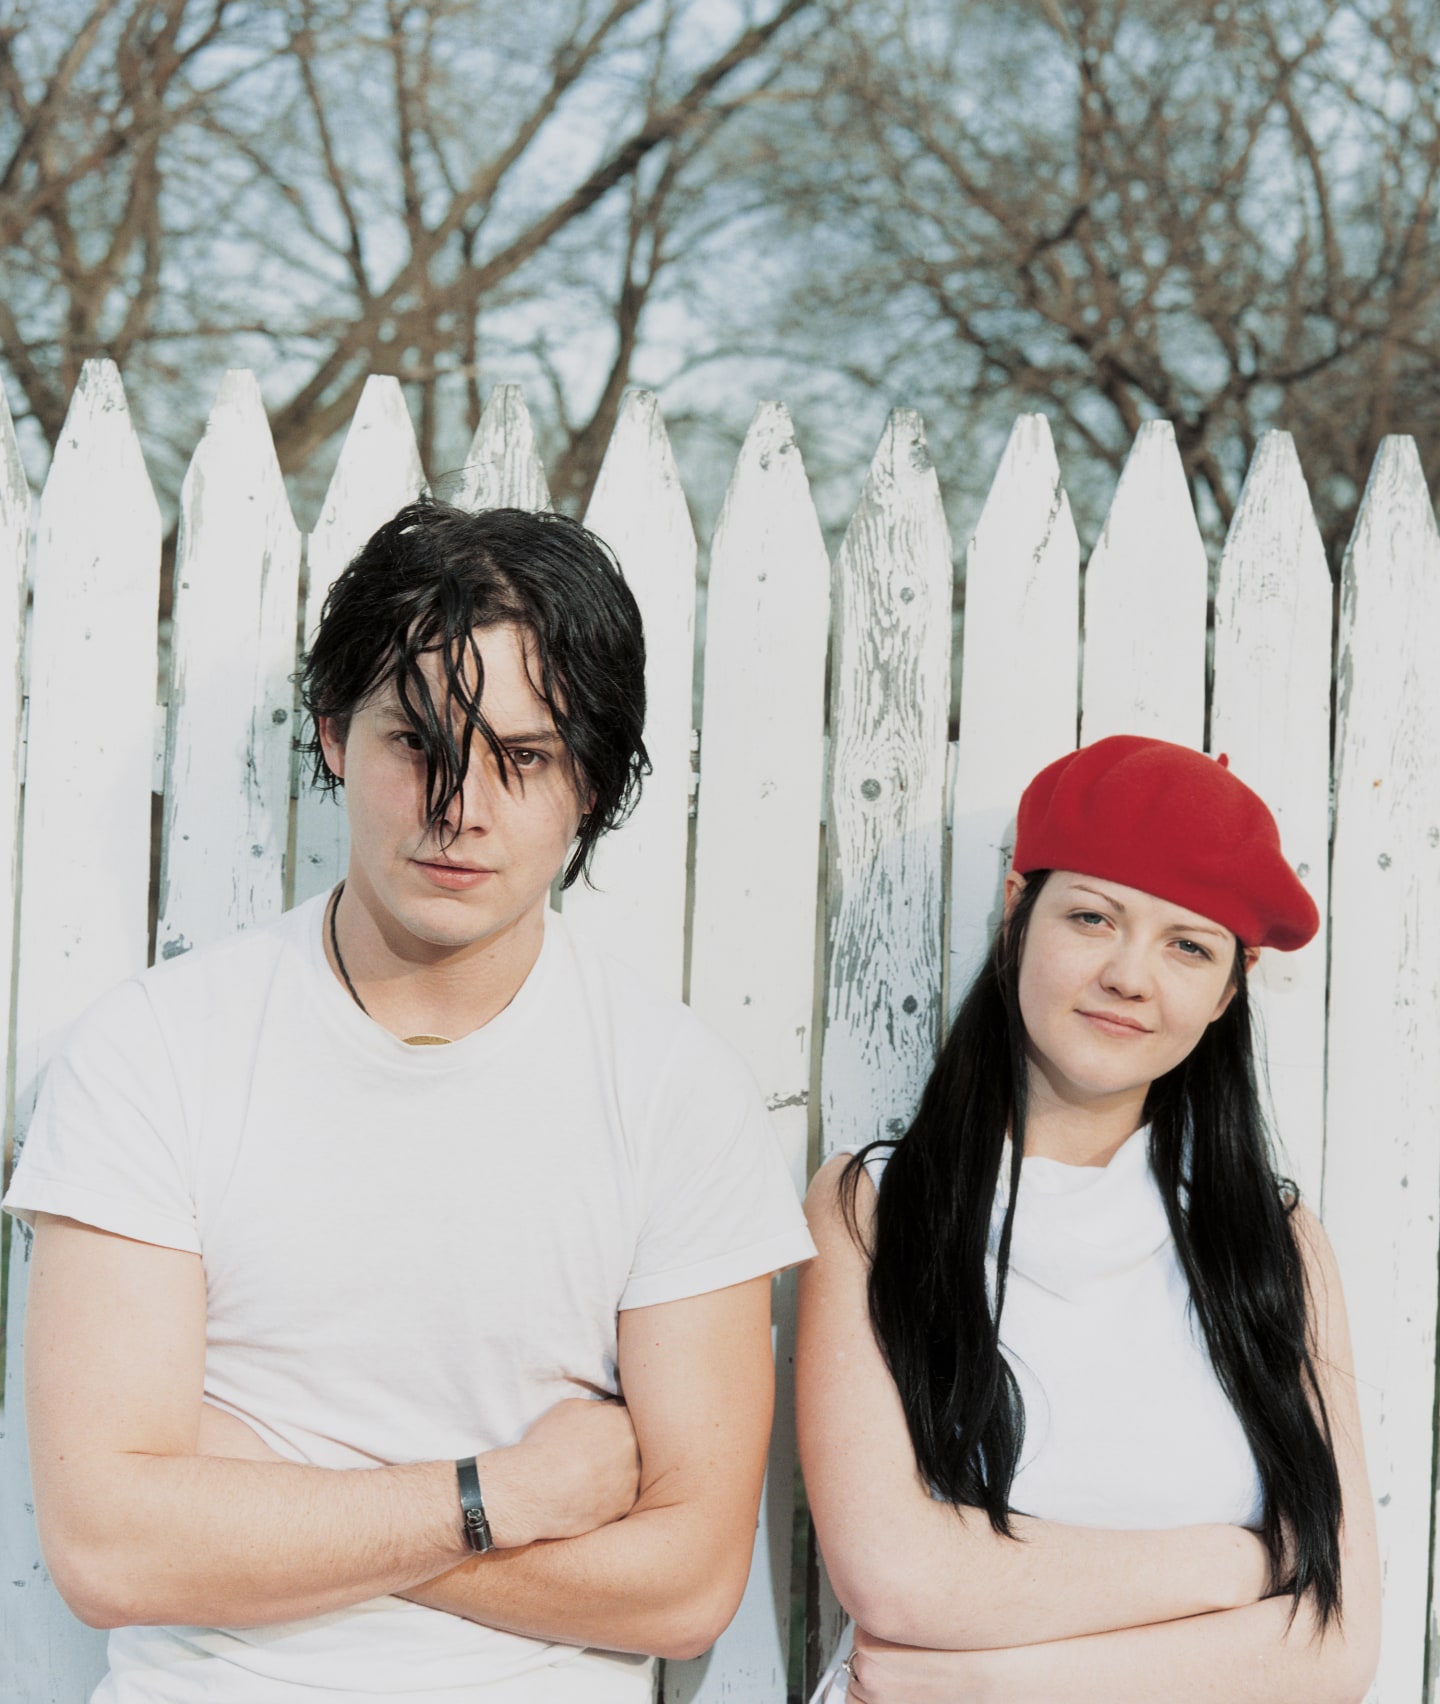 This 2002 White Stripes Cover Story Captures Rock’s Obsession With Authenti...